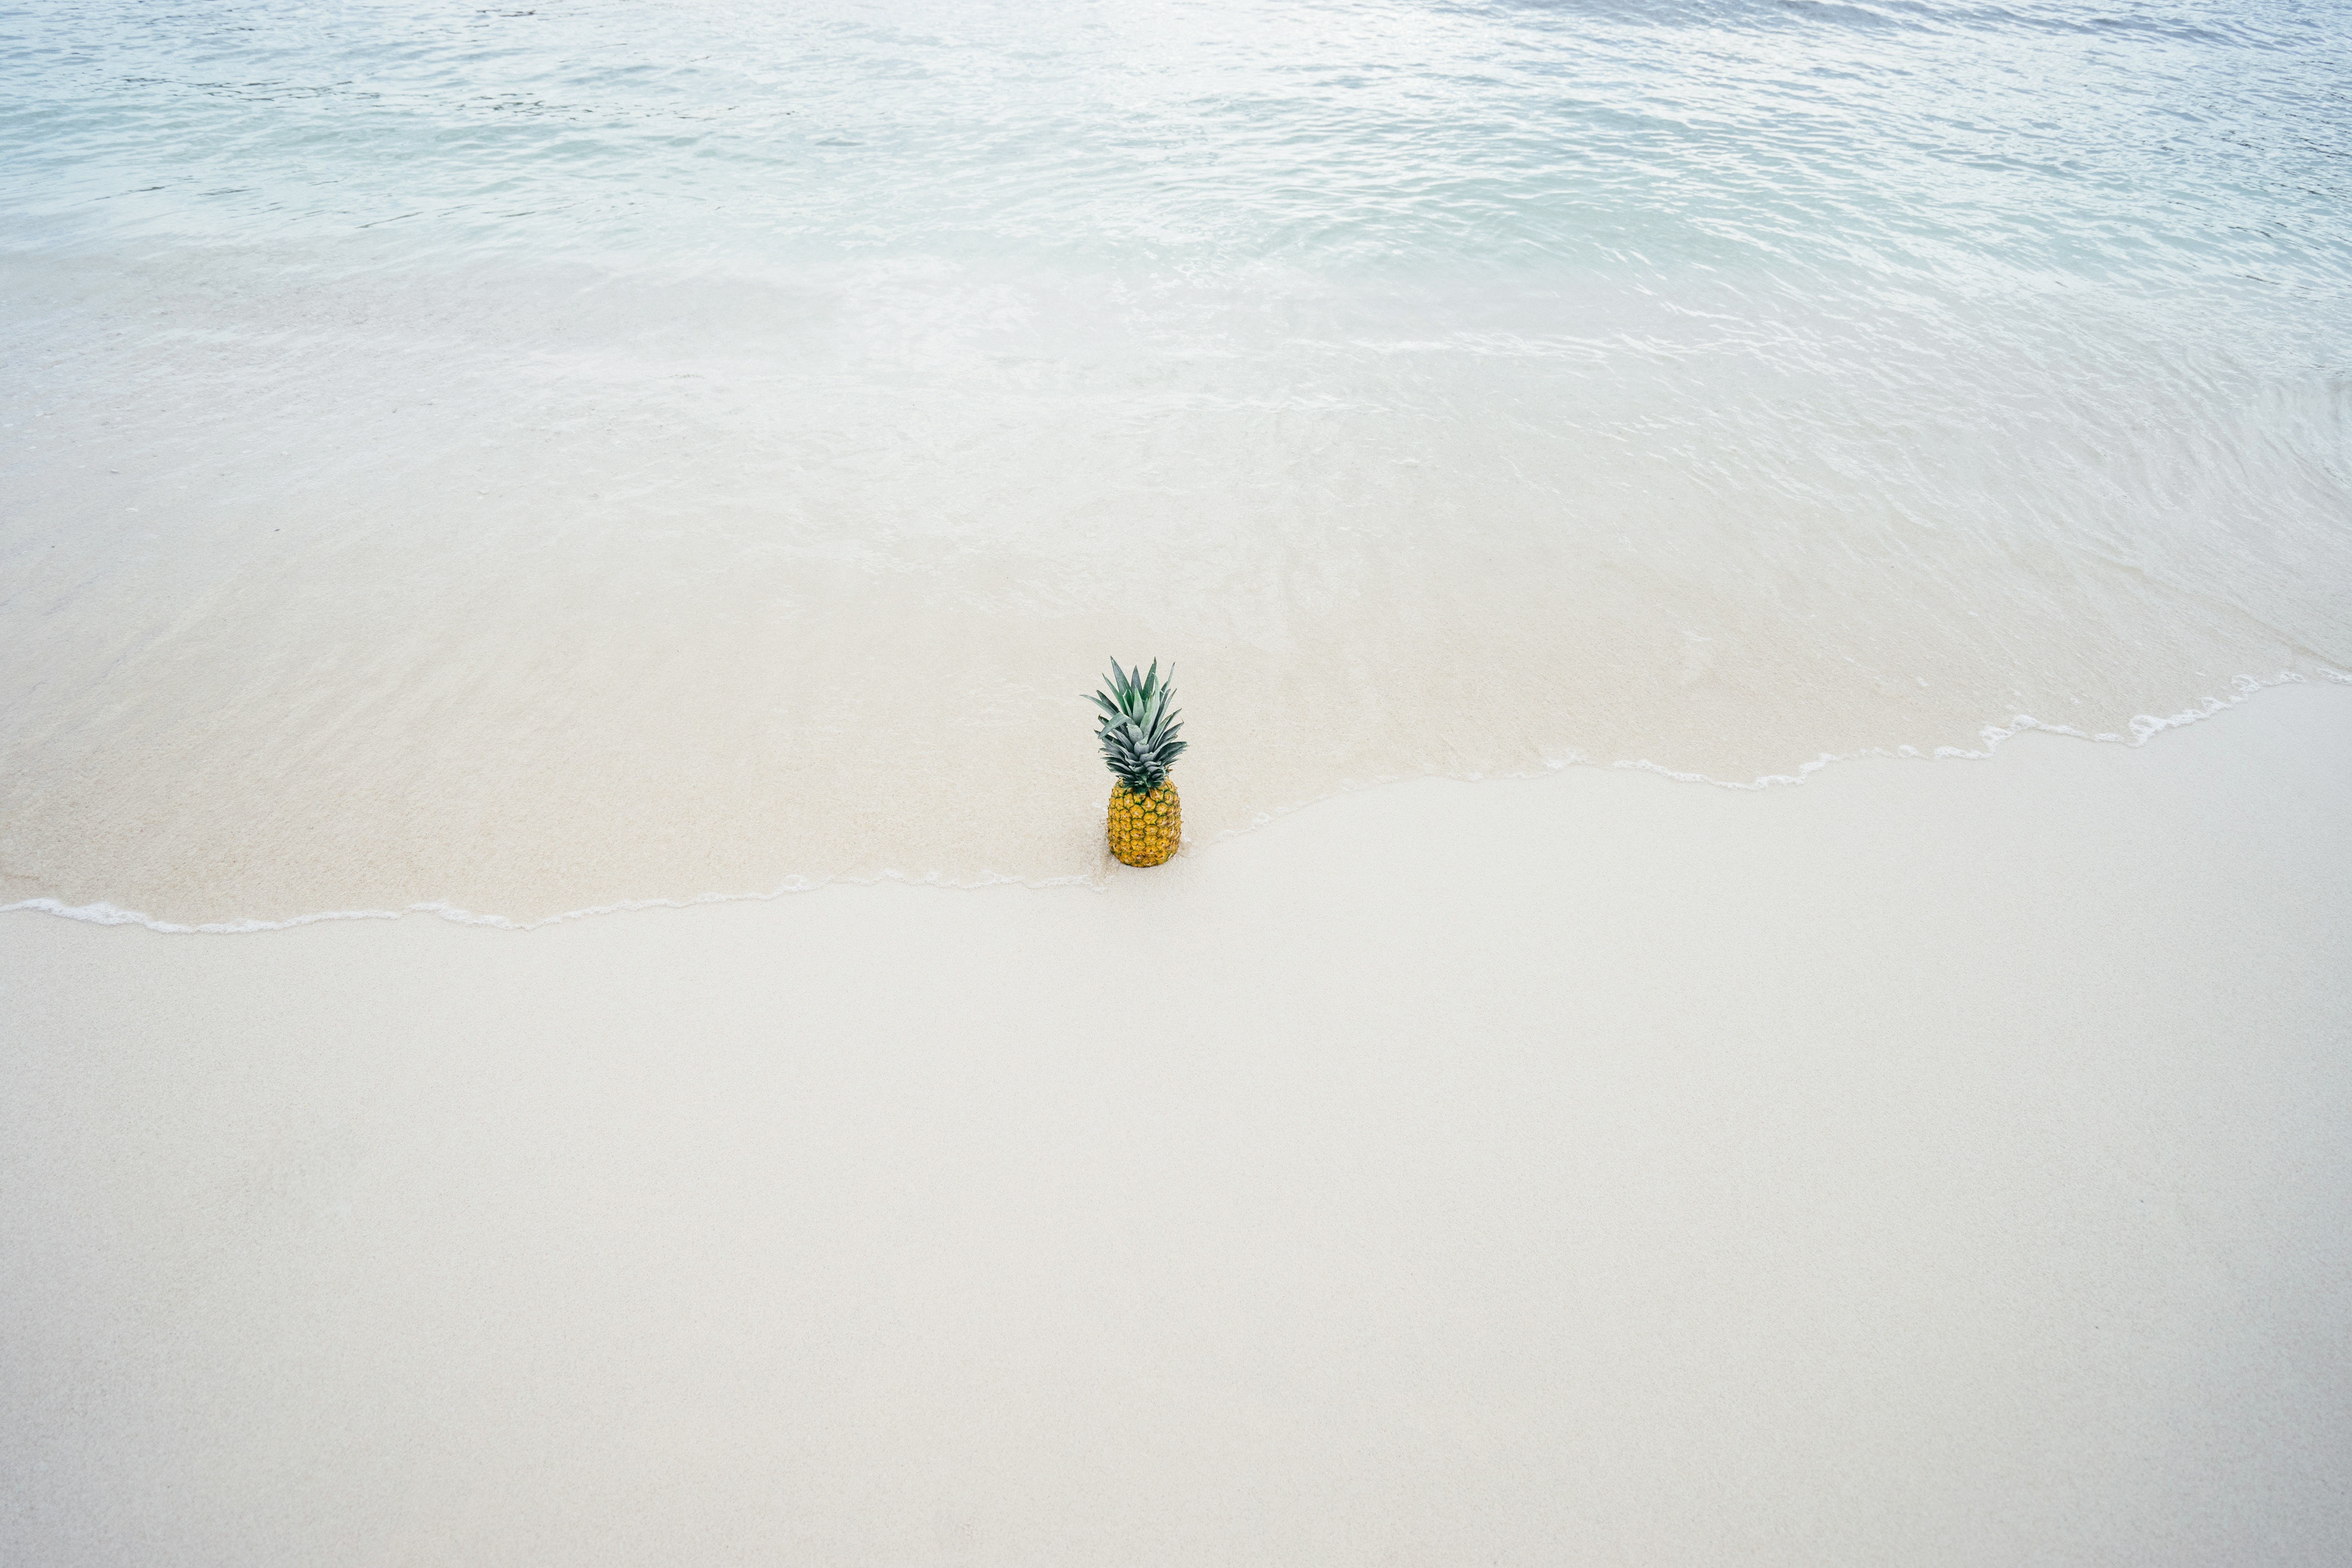 Pineapple in the middle of the seashore photo